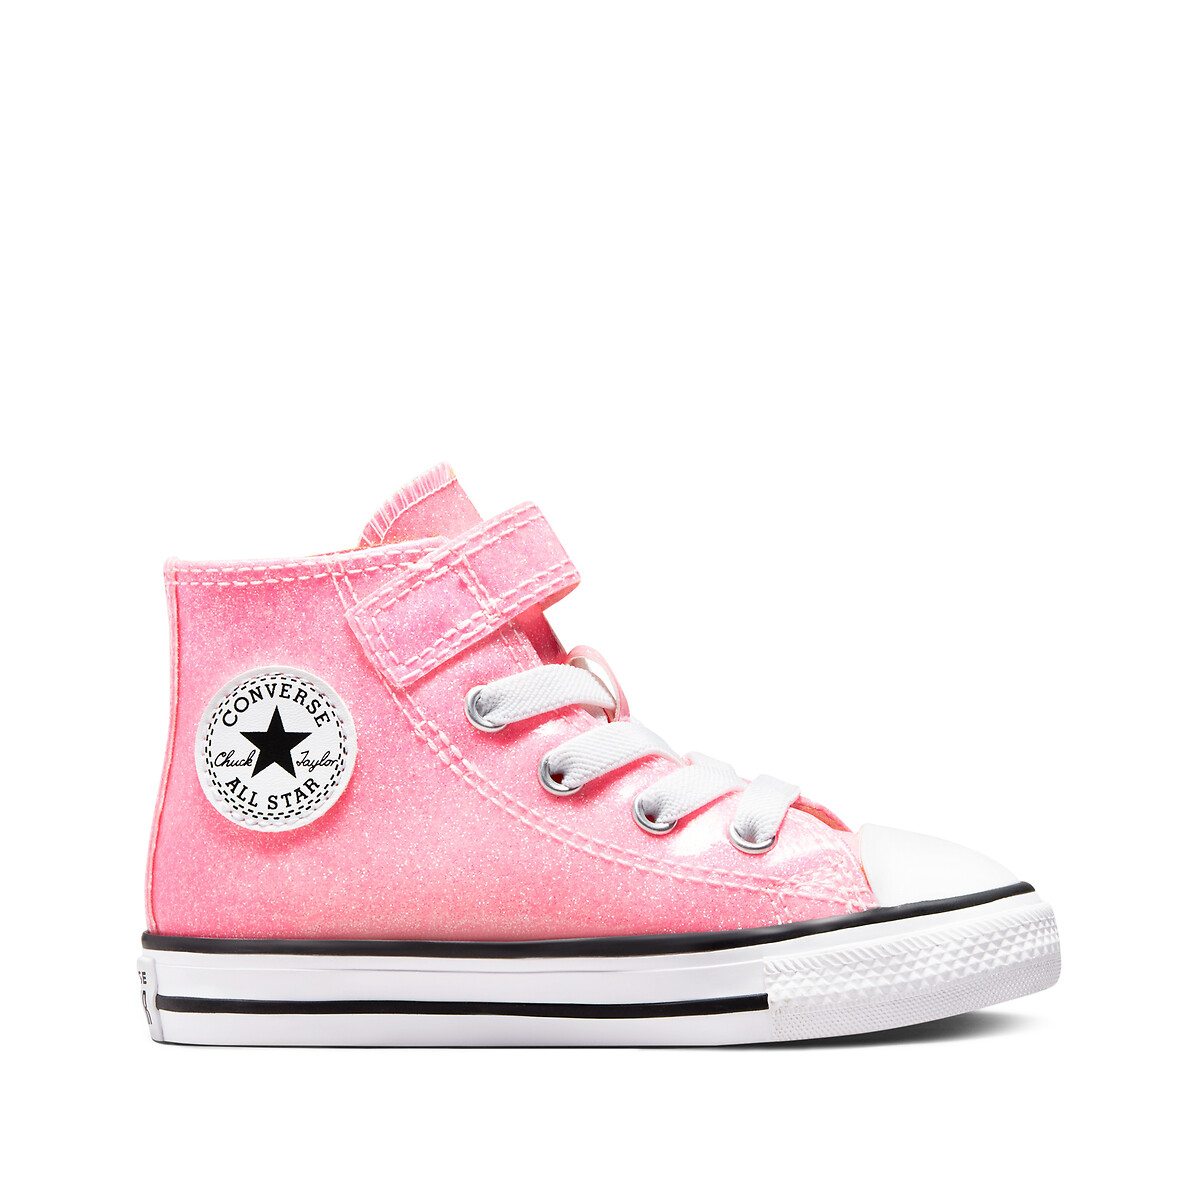 bovenste Kers grond Sneakers all star 1v happy hummingbirds roze Converse | La Redoute